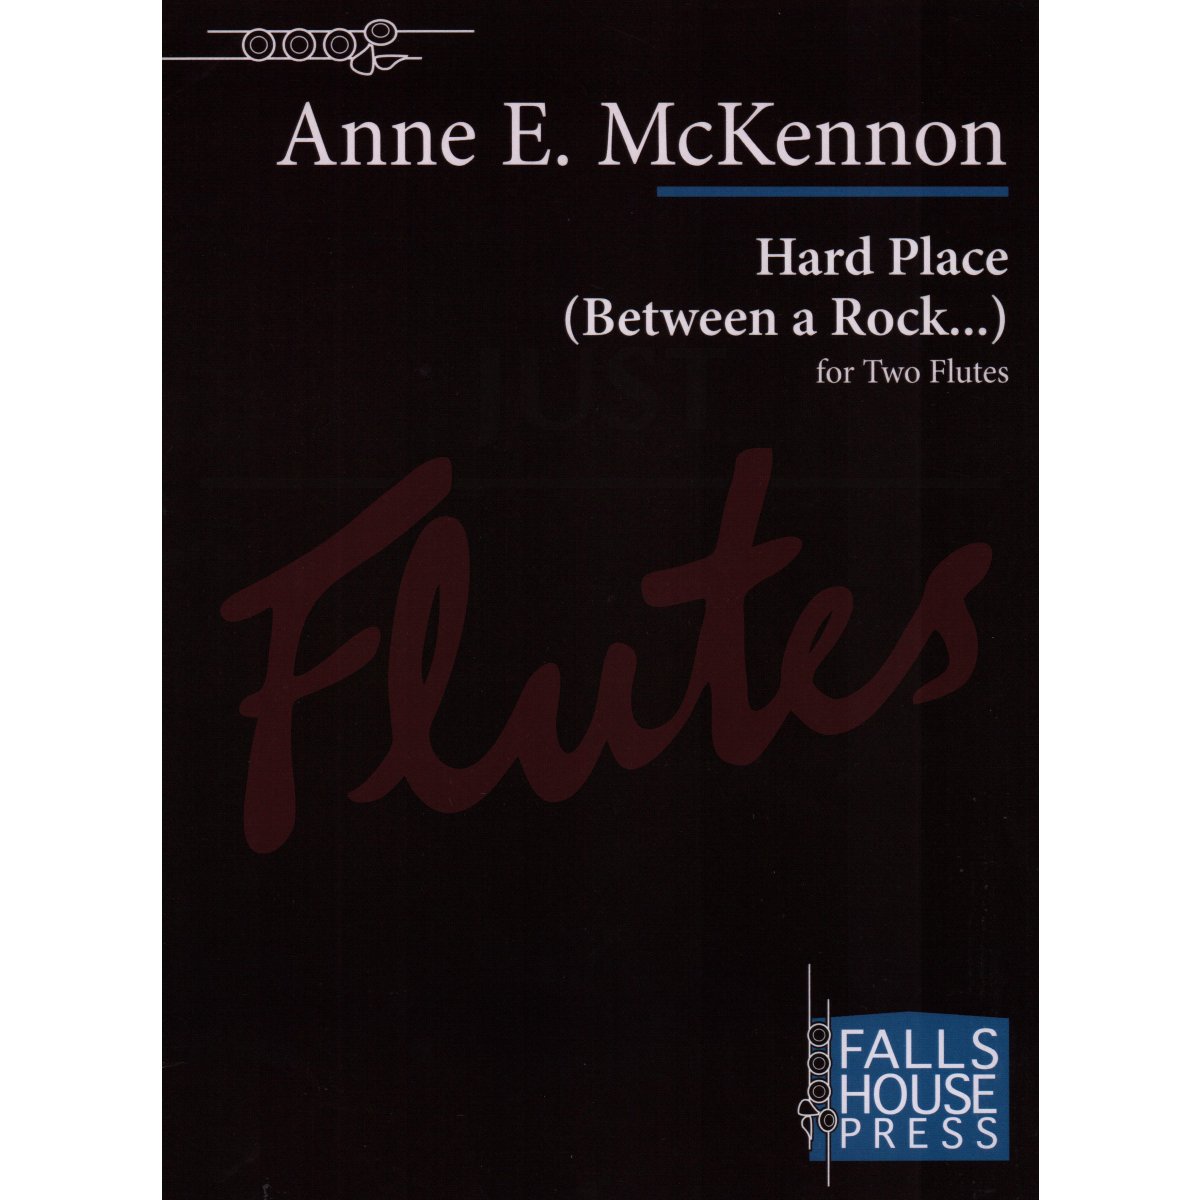 Hard Place (Between a Rock…) for Two Flutes